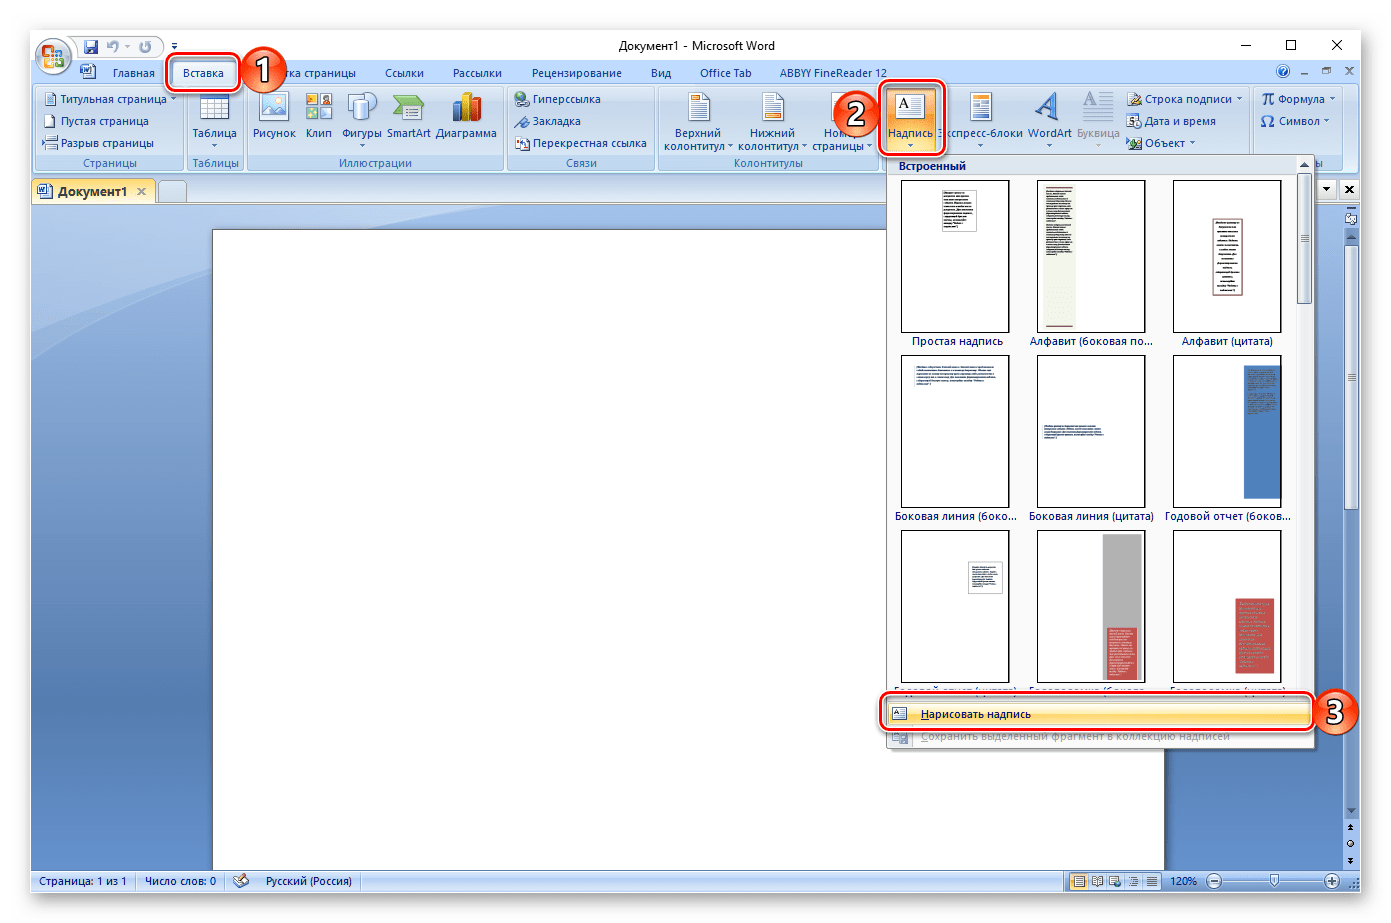 download templates for word 2007 from microsoft